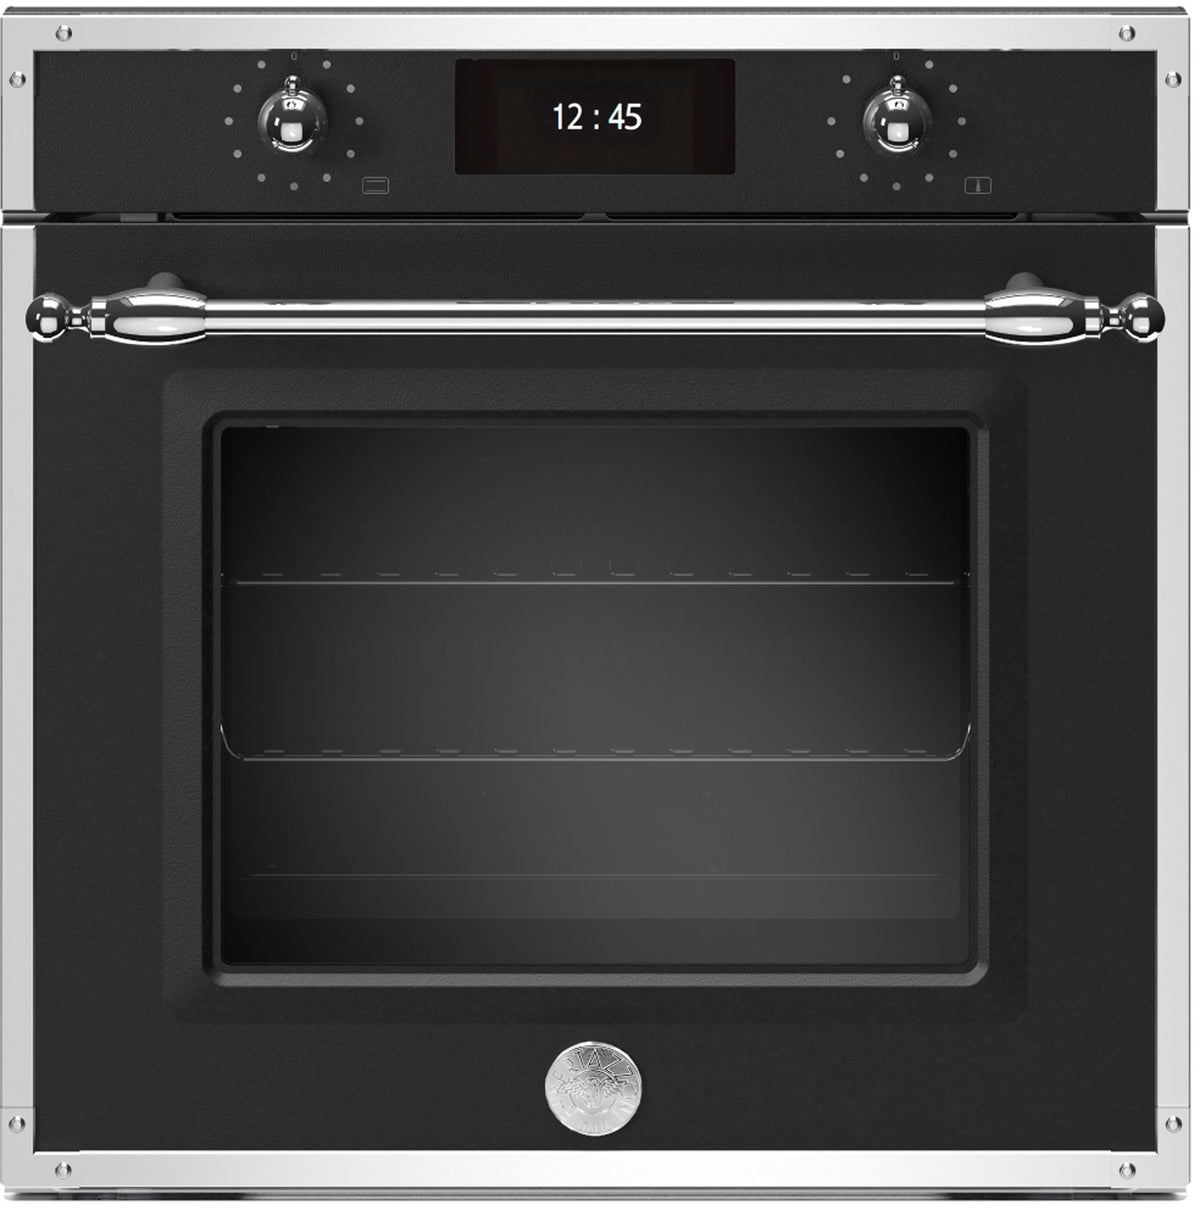 BERTAZZONI F6011HERVPTNE 60cm Electric Multifunction Oven with steam cooking and Pyrolytic cleaning in Black